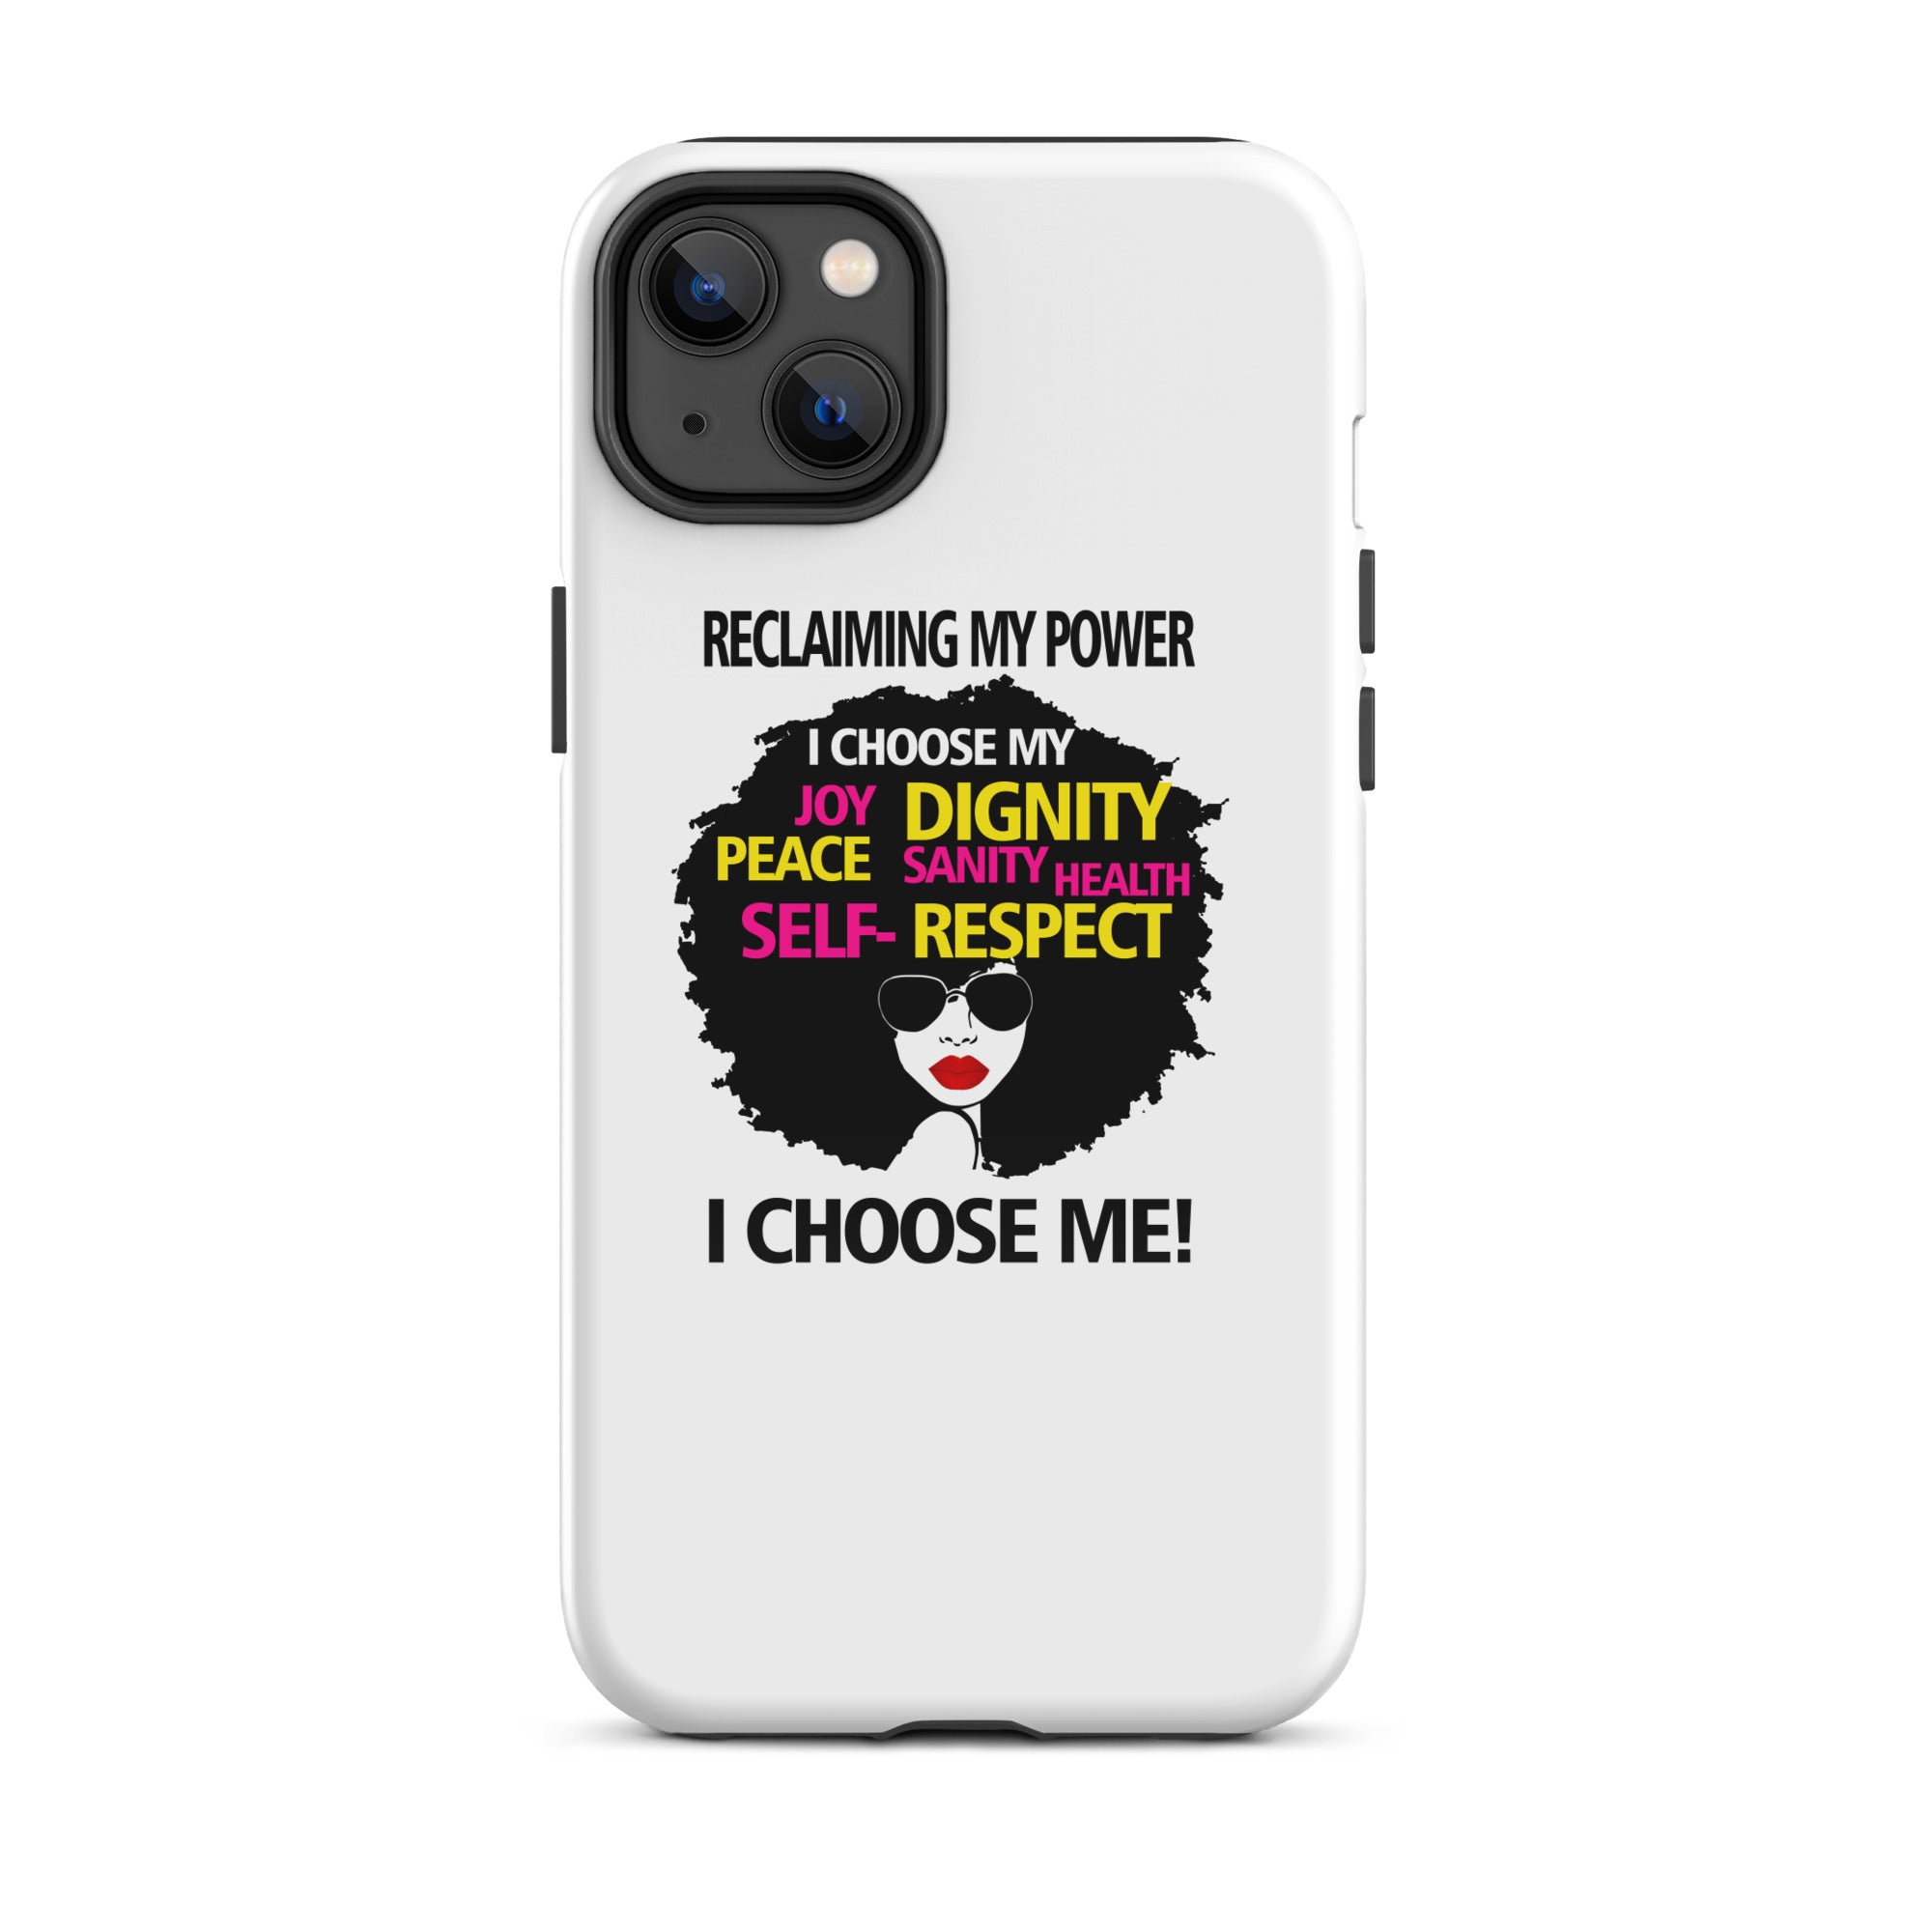 Afro Case for iPhone®